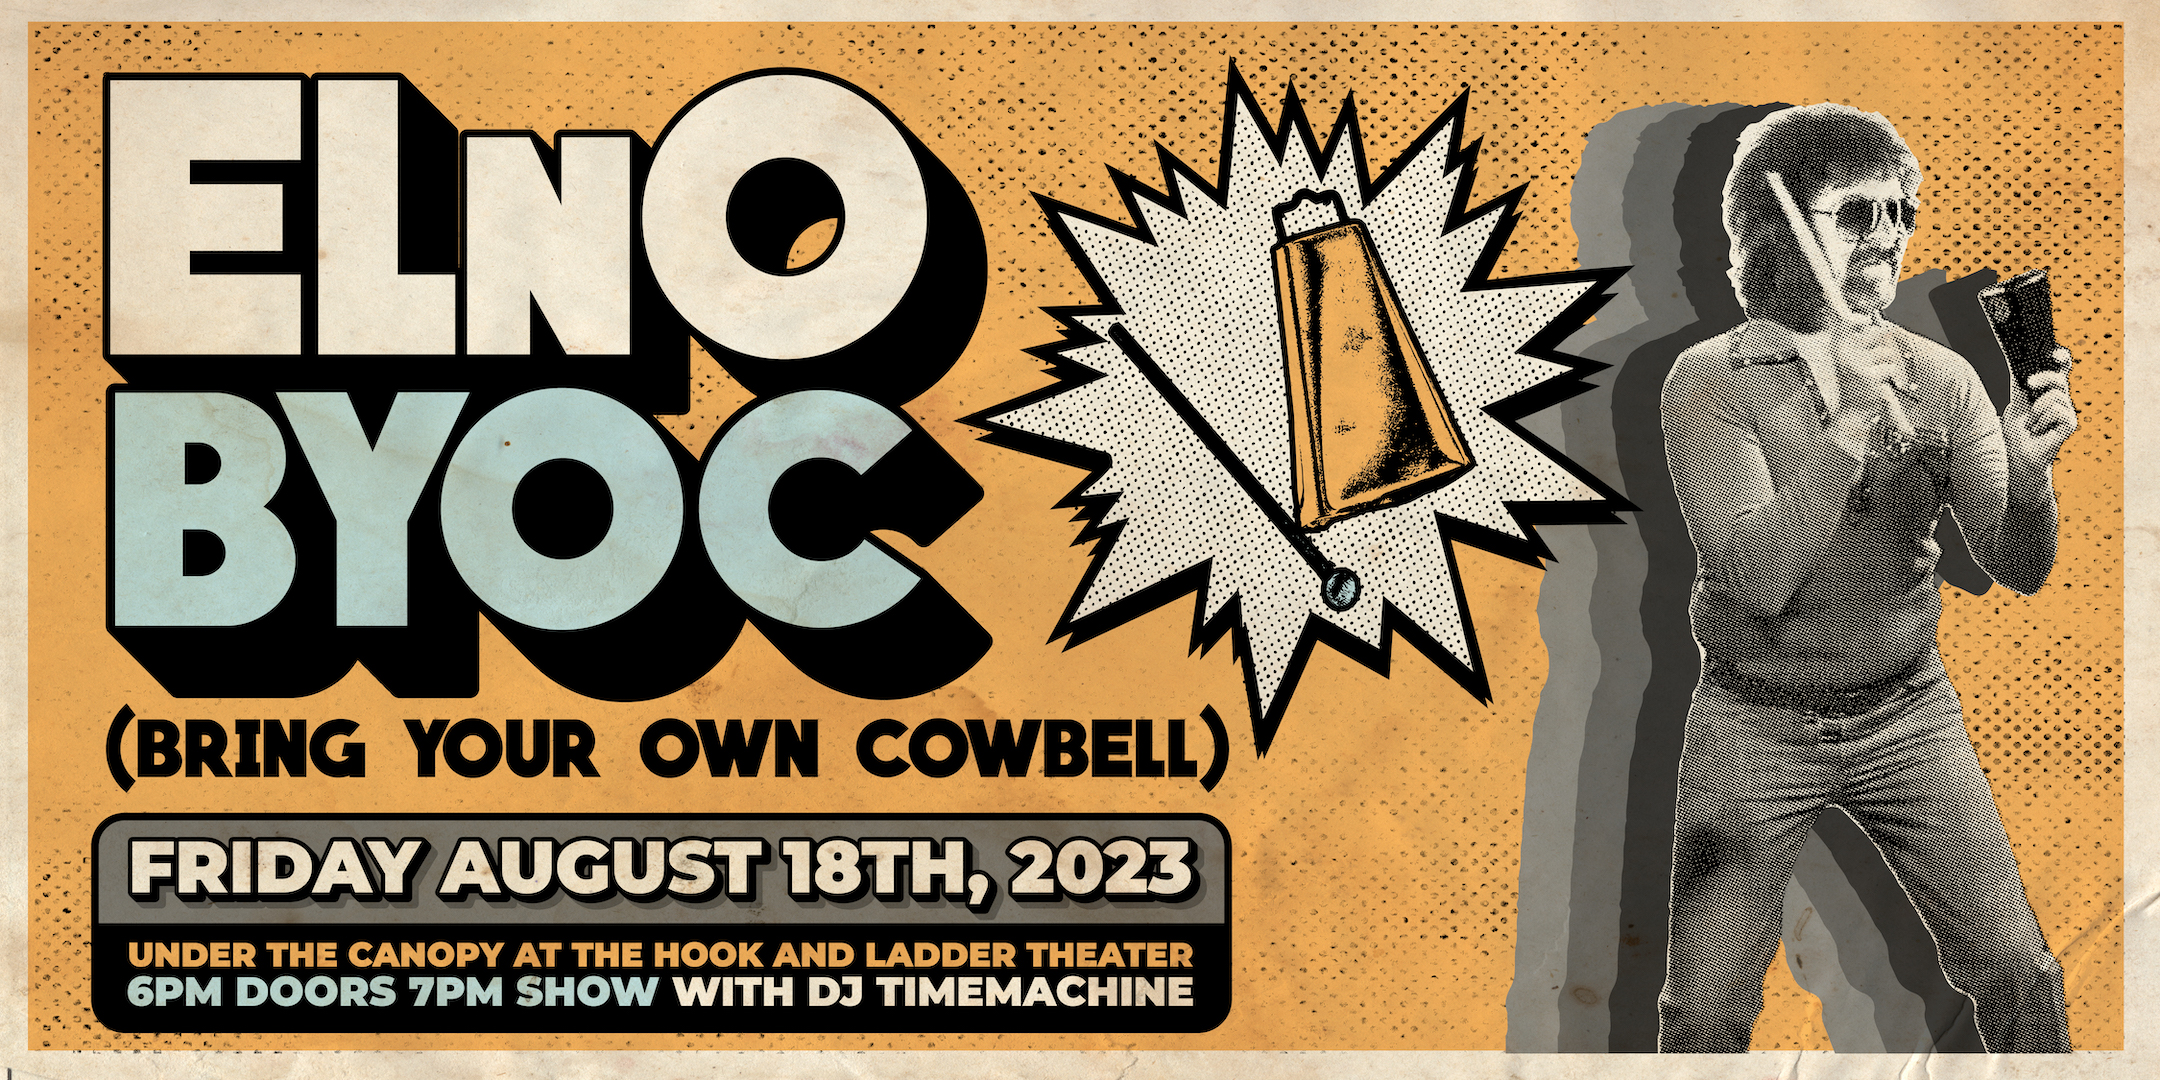 ELnO BYOC (Bring Your Own Cowbell) Friday, August 18 Under The Canopy at The Hook and Ladder Theater "An Urban Outdoor Summer Concert Series" Doors 6:00pm :: Music 7:00pm :: 21+ Reserved Seats: $40 GA: $24 ADV / $30 DOS *Does not include Fees